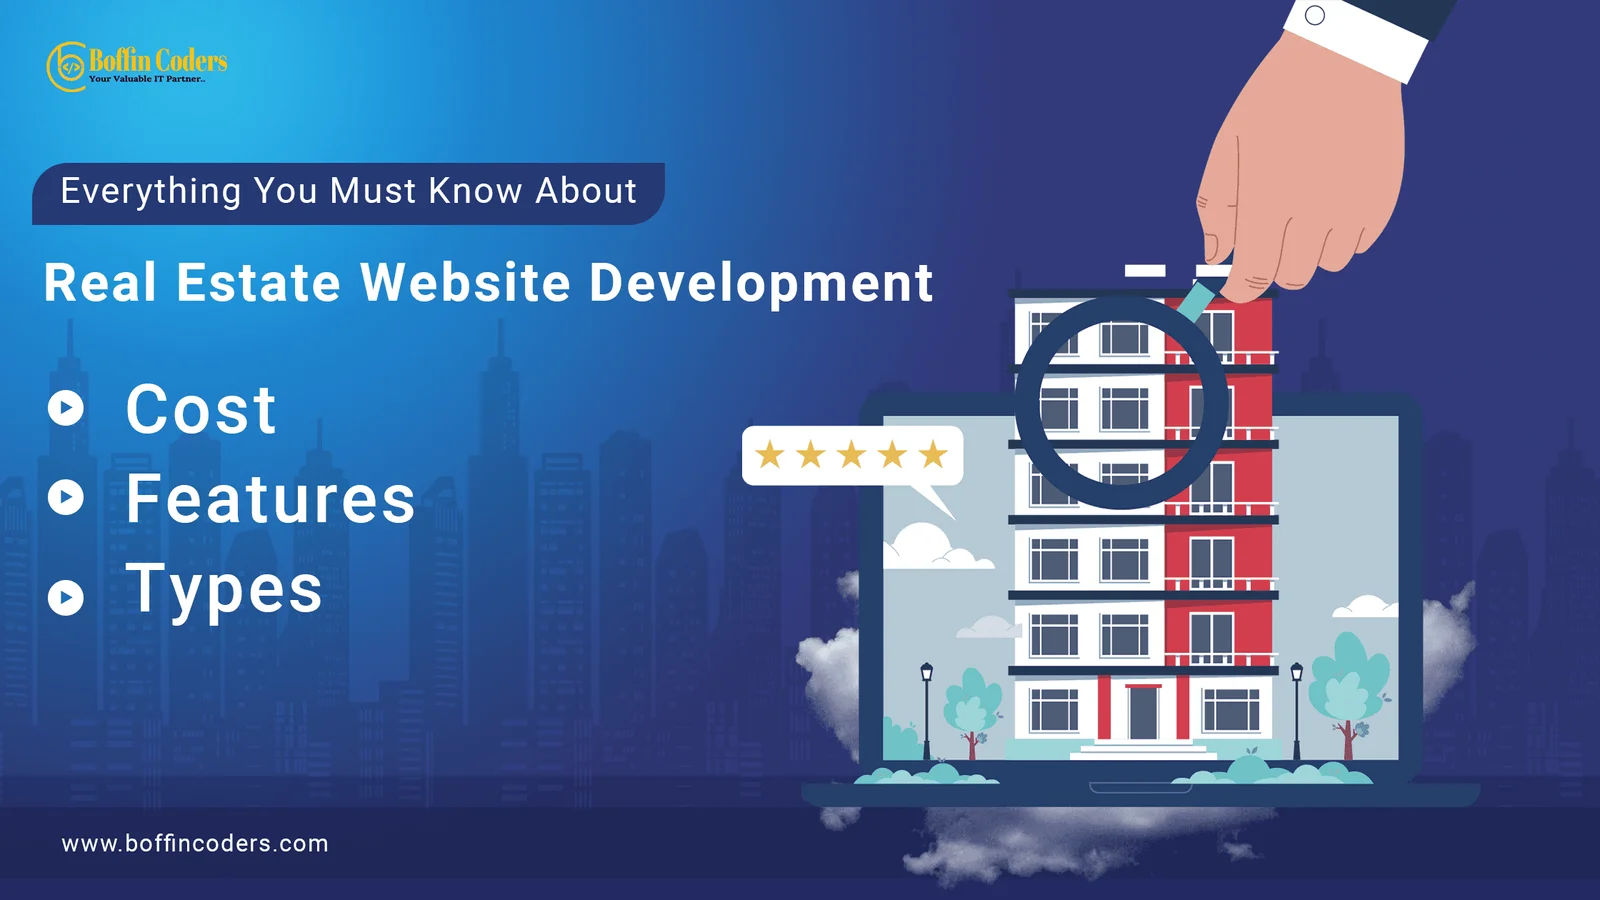 Everything You Must Know About Real Estate Website Development: Cost, Features, and Types